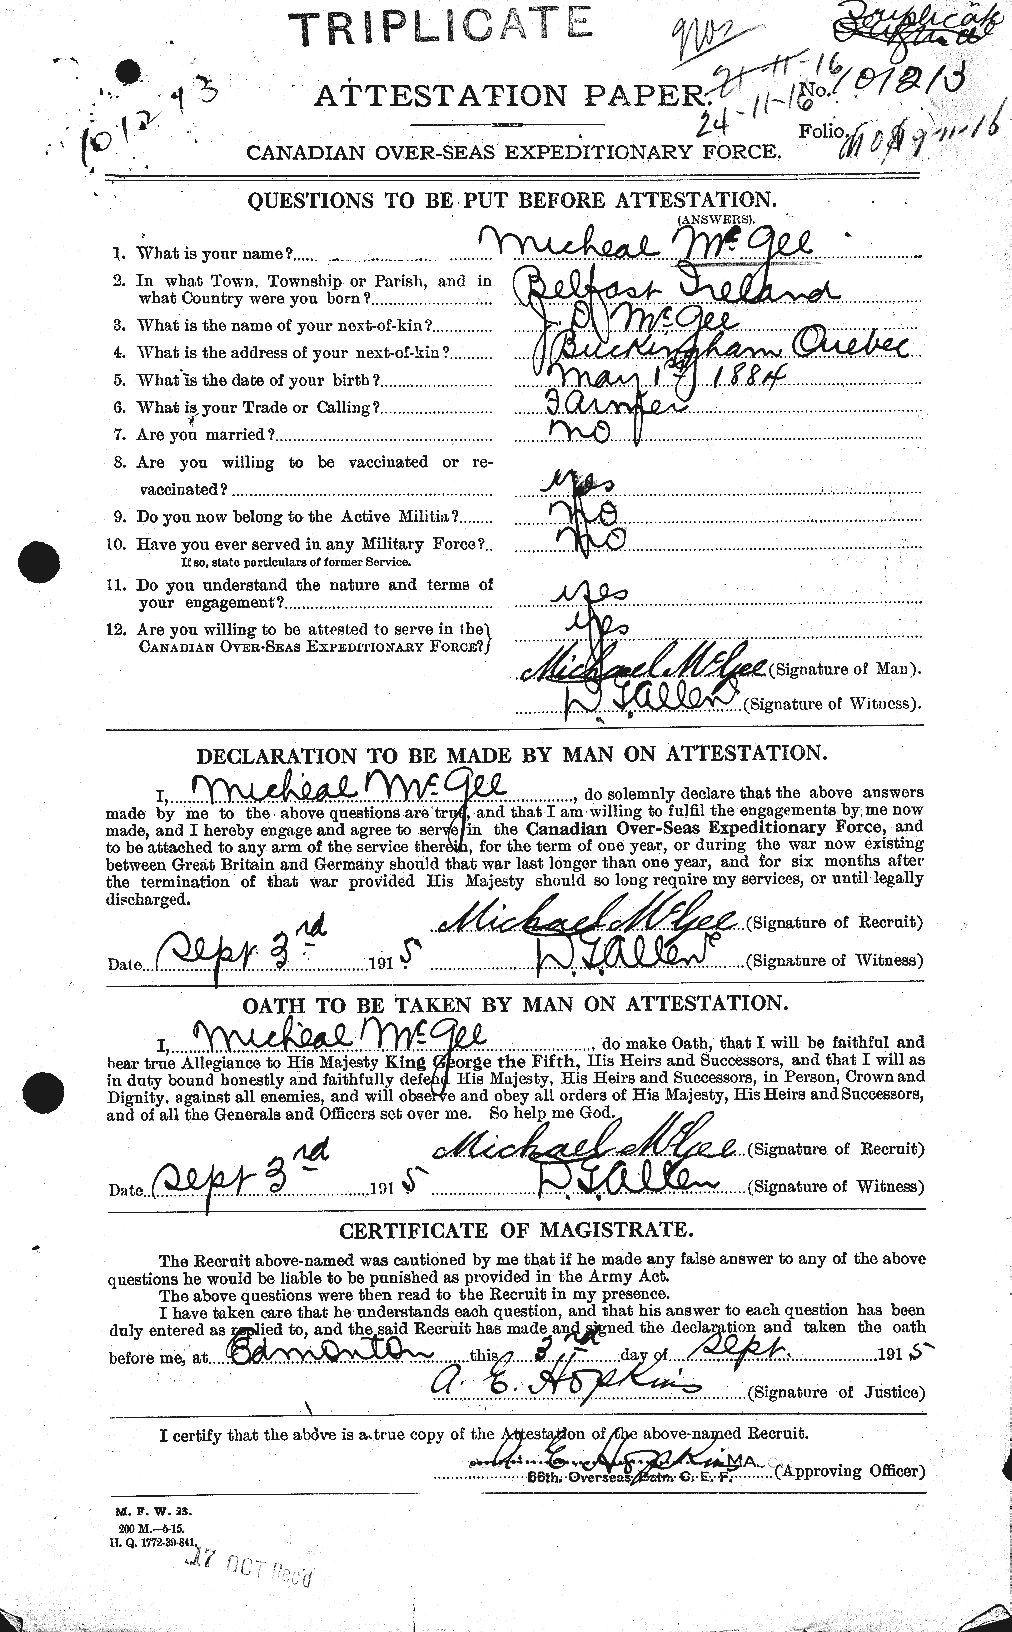 Personnel Records of the First World War - CEF 520503a